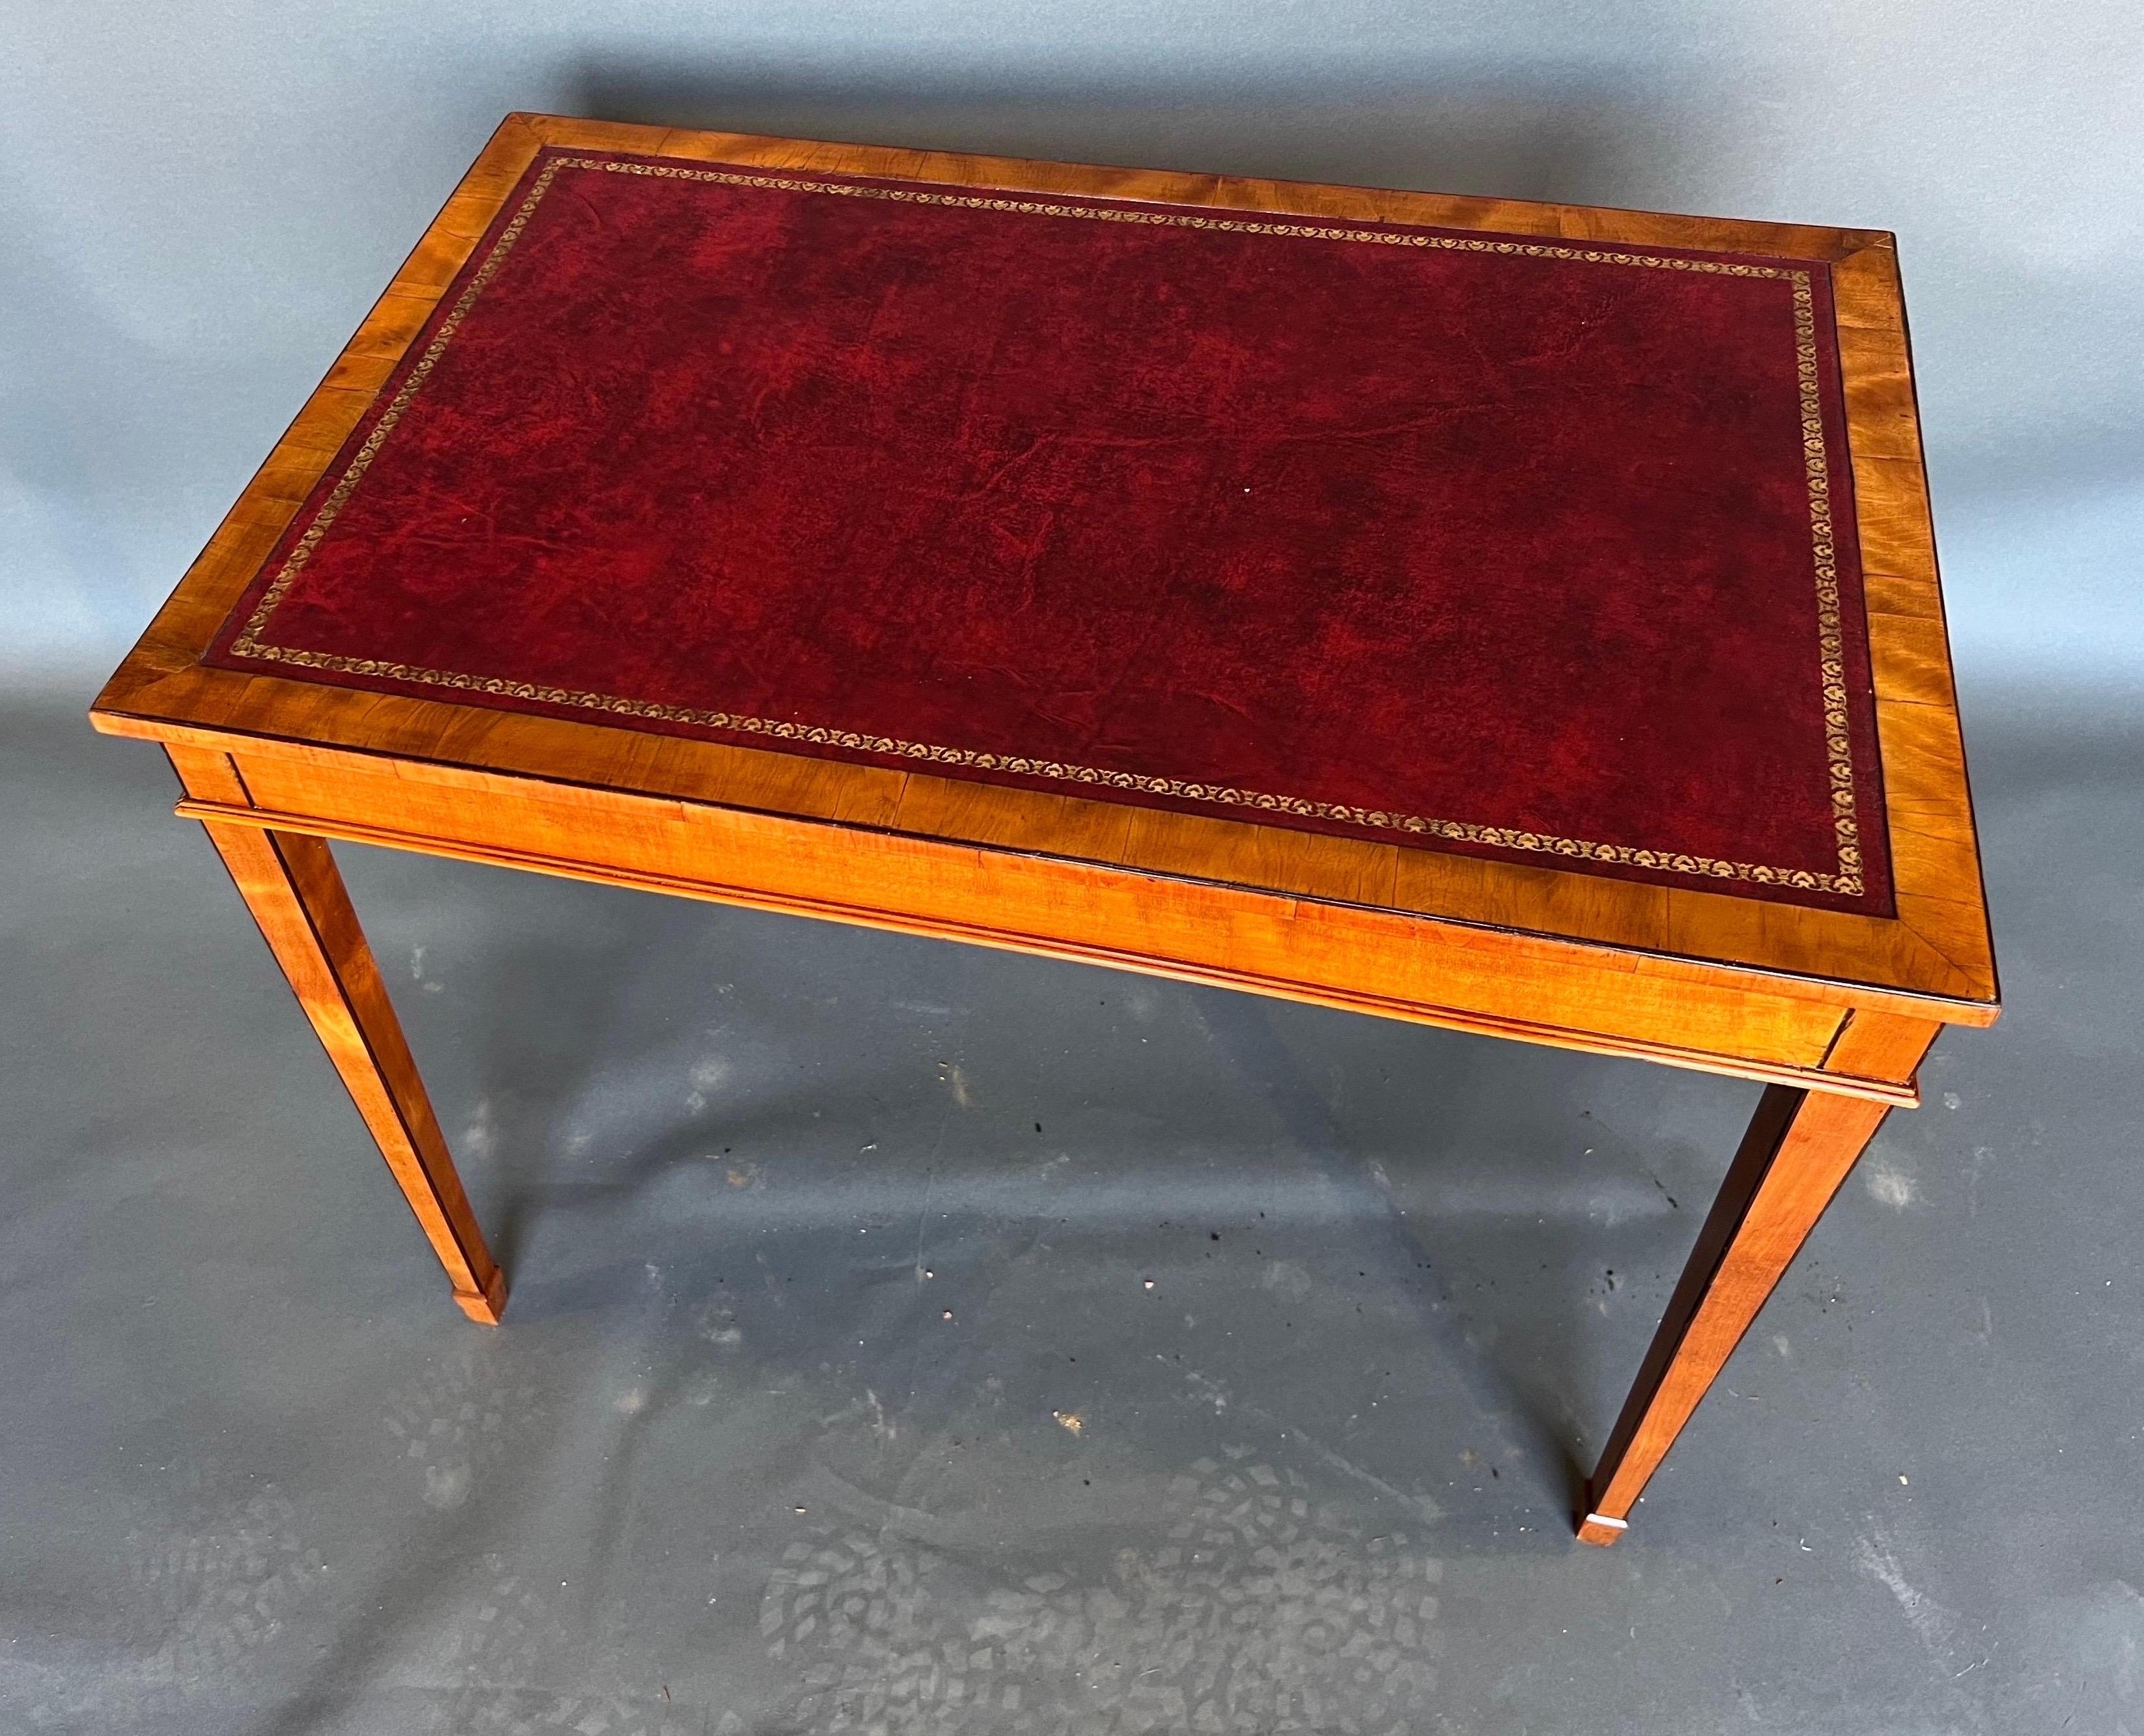 19th century English Edwardian period satinwood and leather top table. Very pretty color and the smaller scale makes it a much more versatile option as a side table or console.